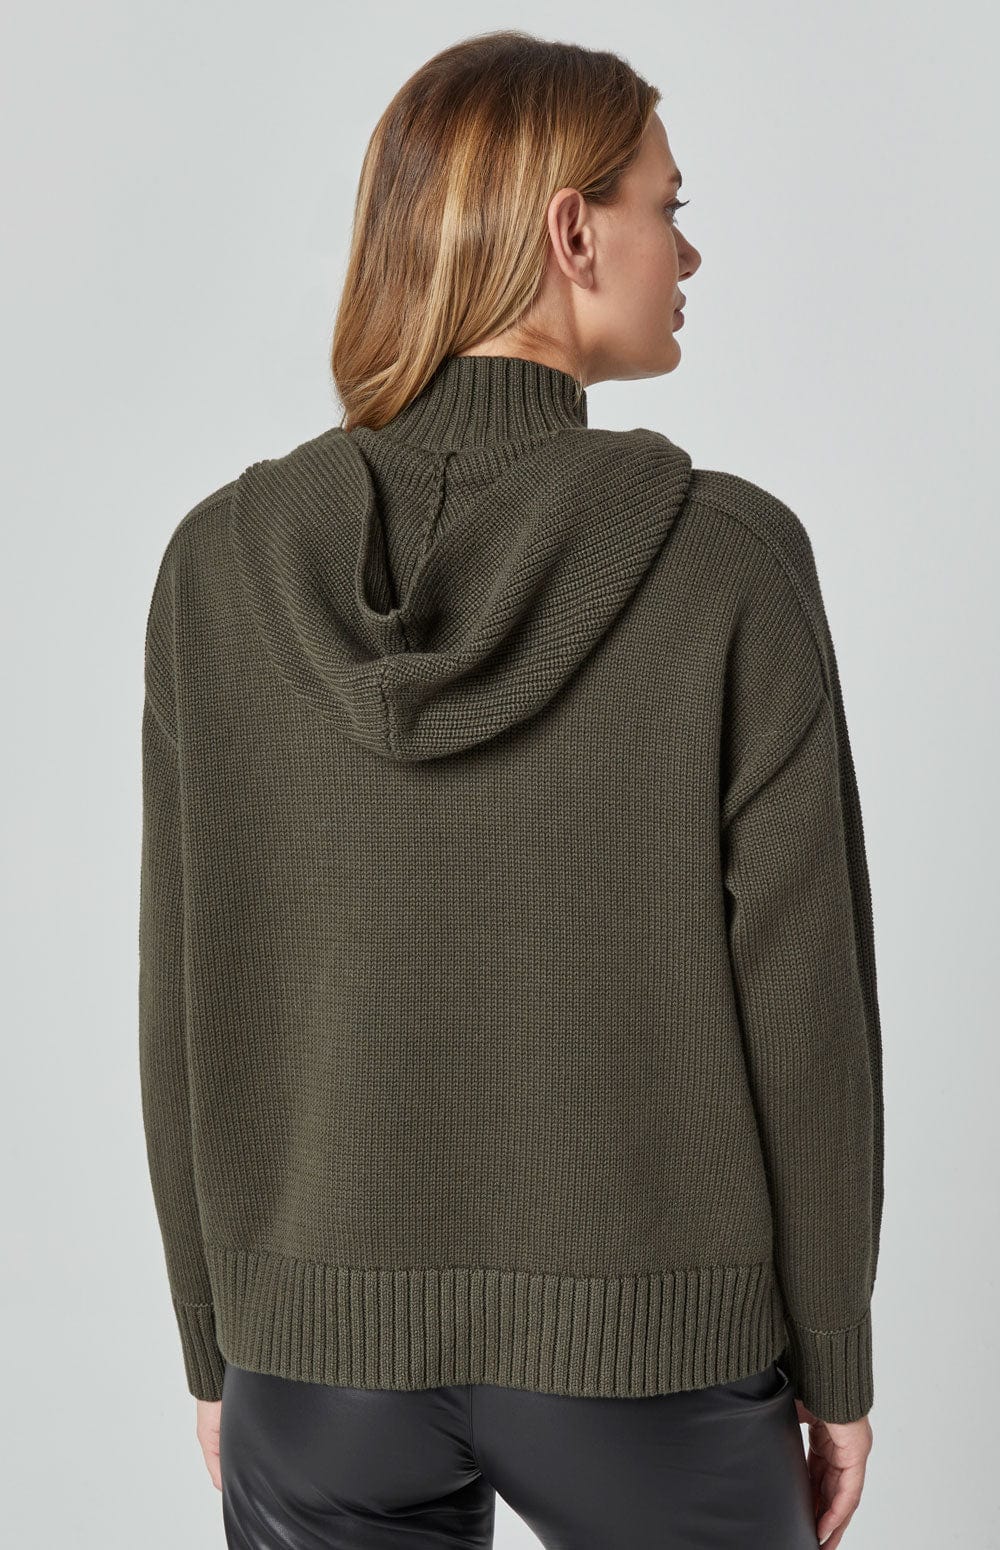 ANR Womens Sweater Sterling Hoodie | Olive